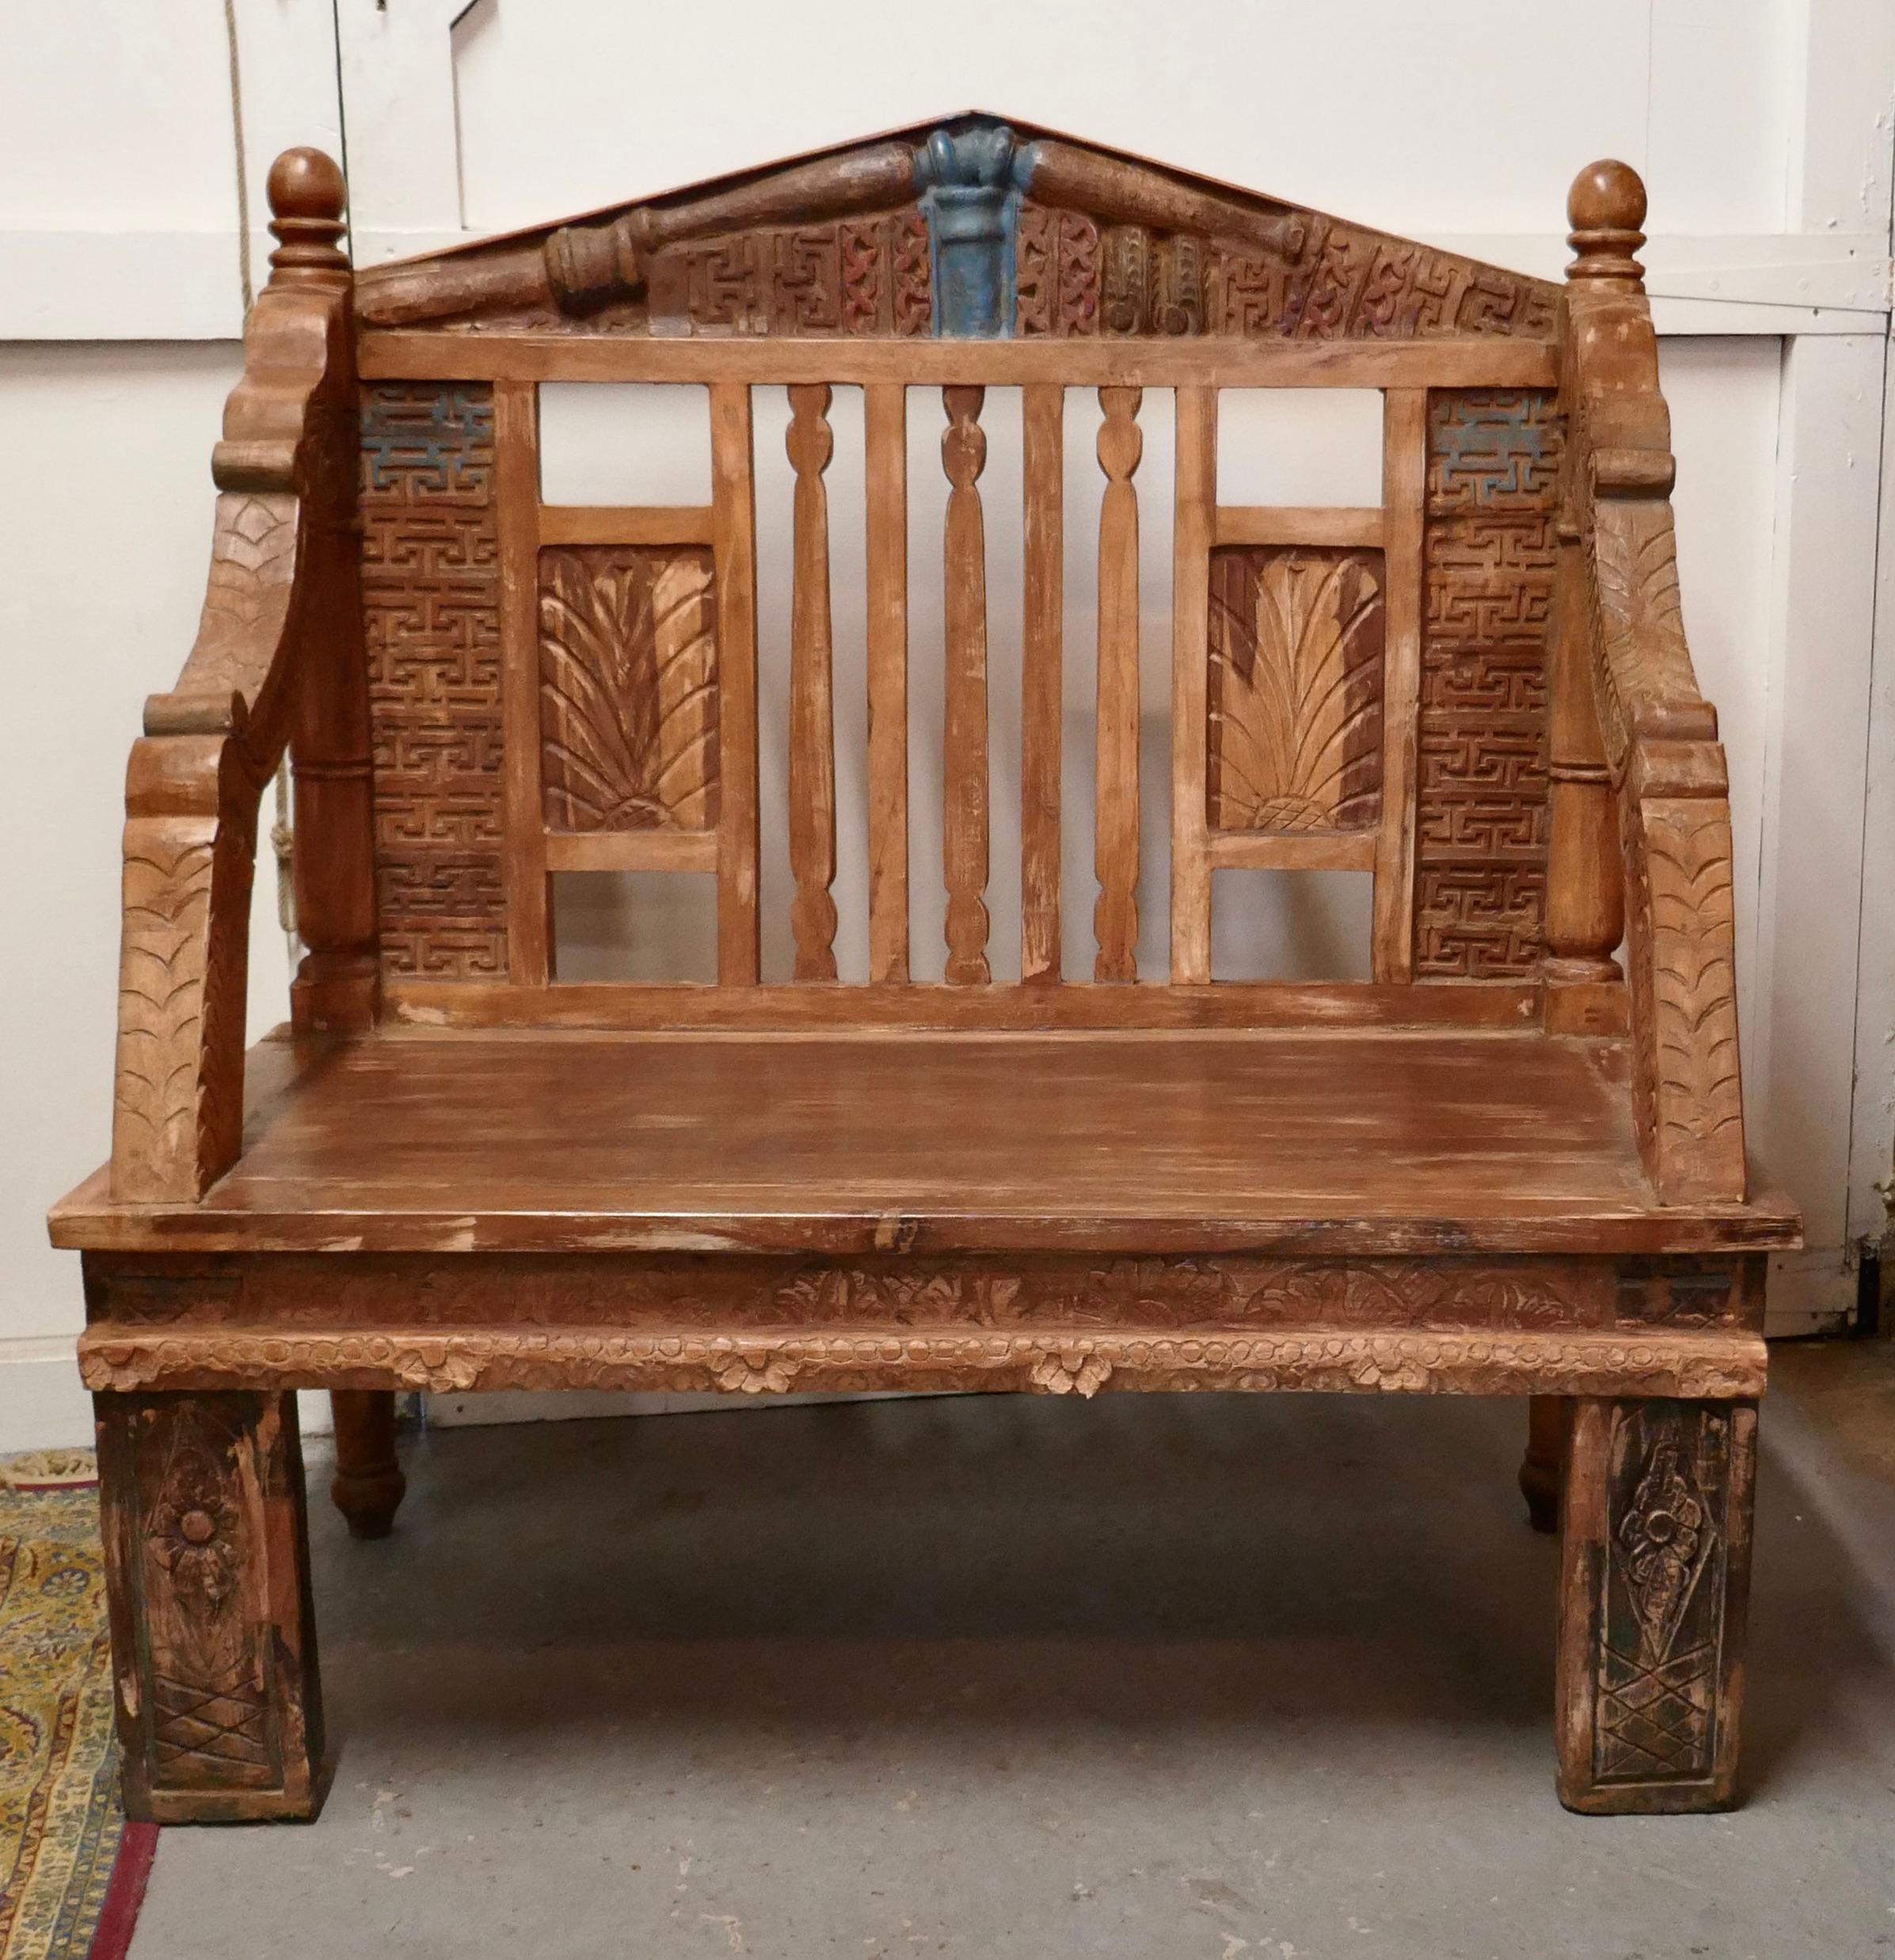 Hand made Anglo Indian Folk Art bench

 The bench has been very skilfully made using old architectural materials and carvings it is a completely unique and one off piece 
It has the most magnificent look combined with a patina which really shows